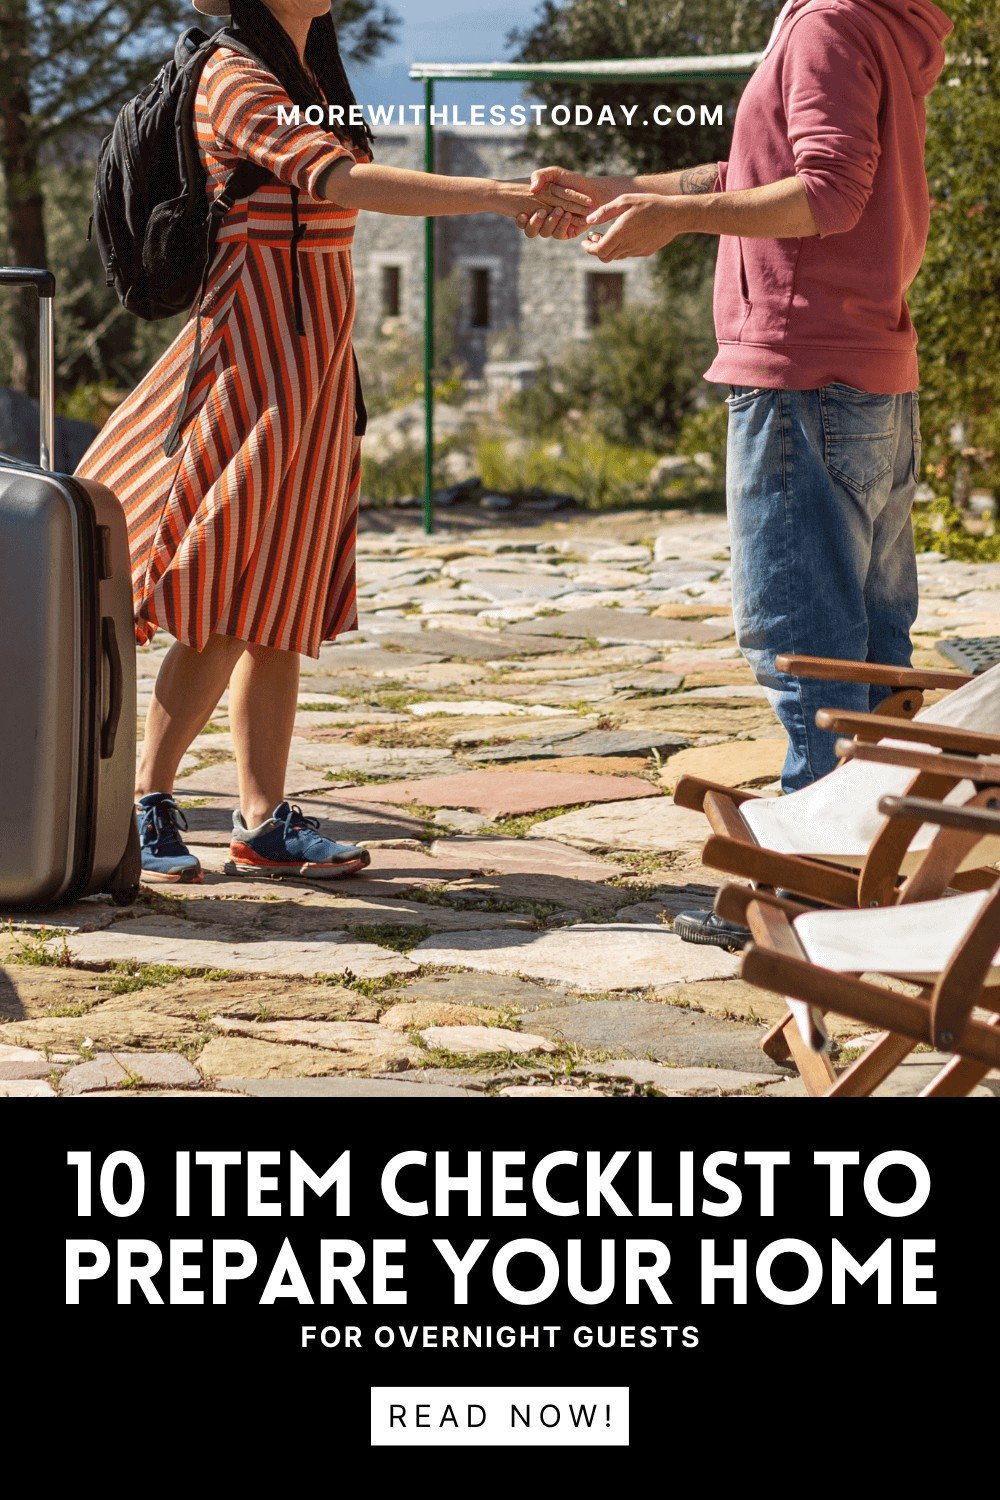 10 Item Checklist to Prepare Your Home for Overnight Guests - PIN